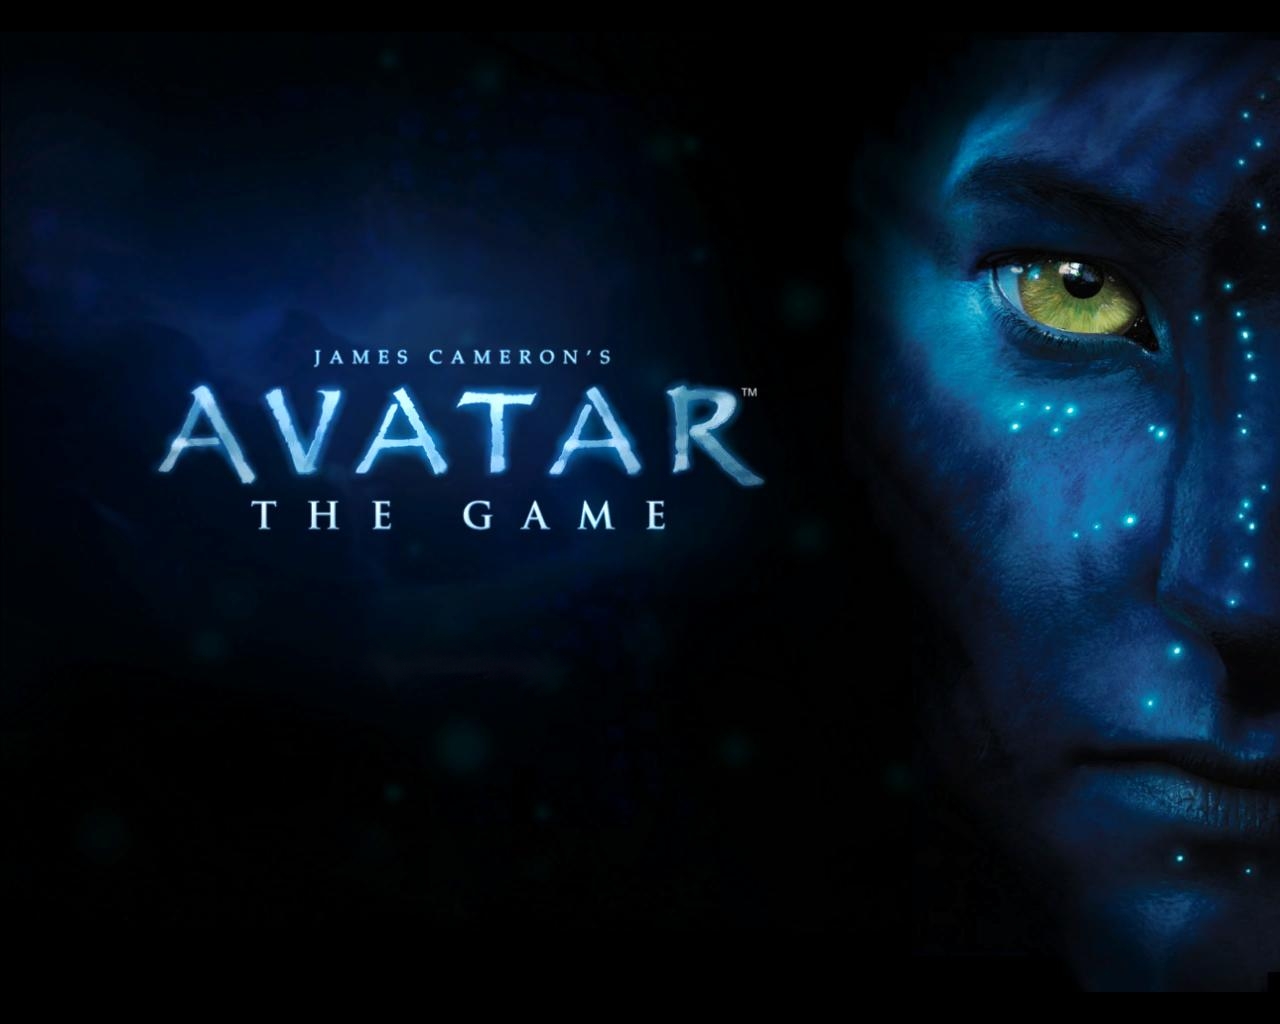 AVATAR THE GAME (REALIZATION DIRECTOR)